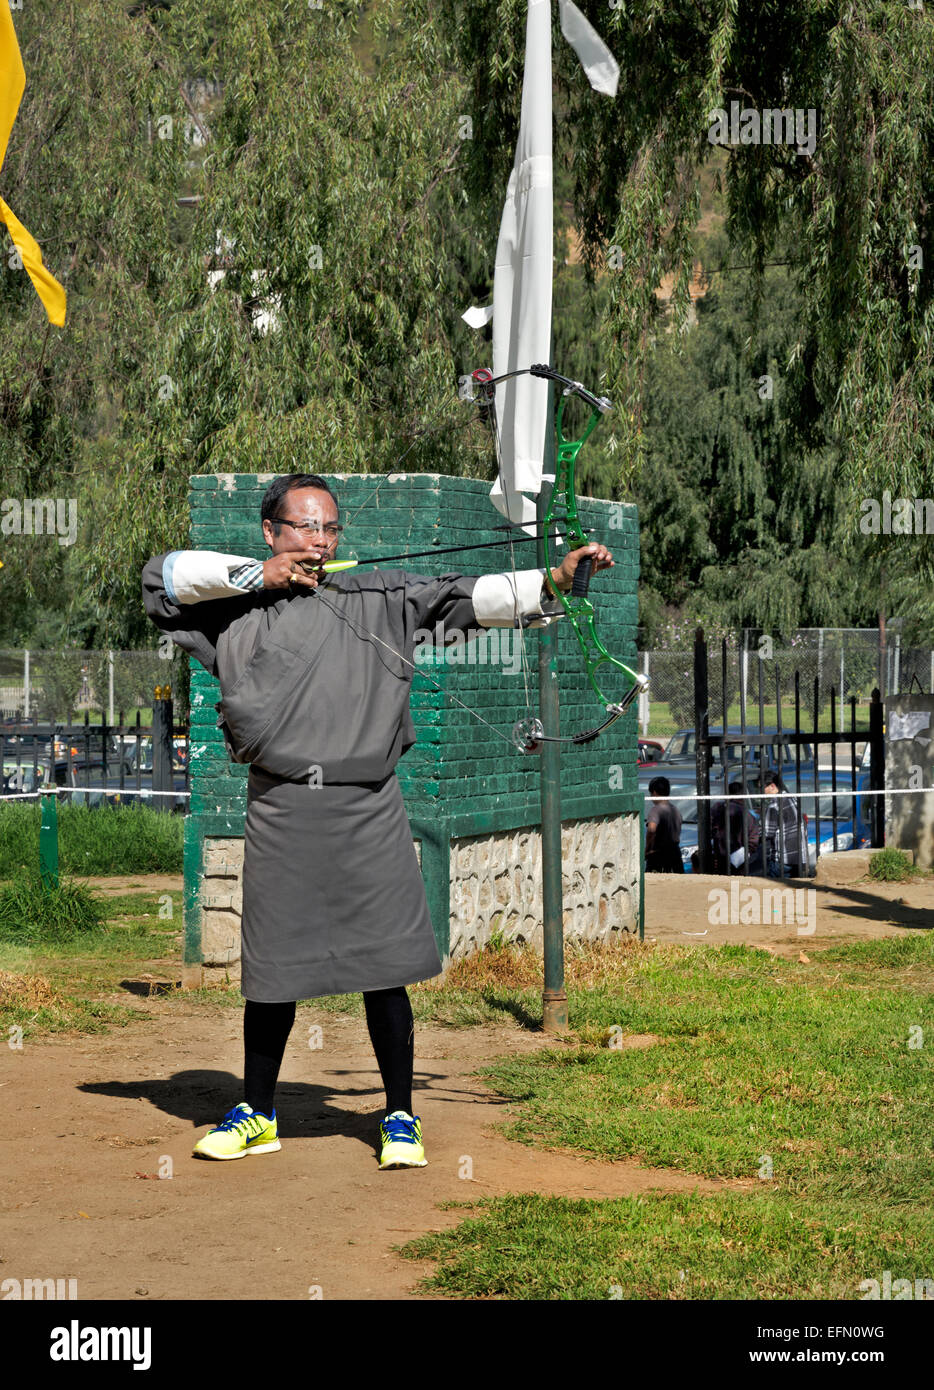 BU00056-00...BHUTAN - Archer in traditional garb (a gho) taking part in a tournament shooting at a target 145 meters away. Stock Photo